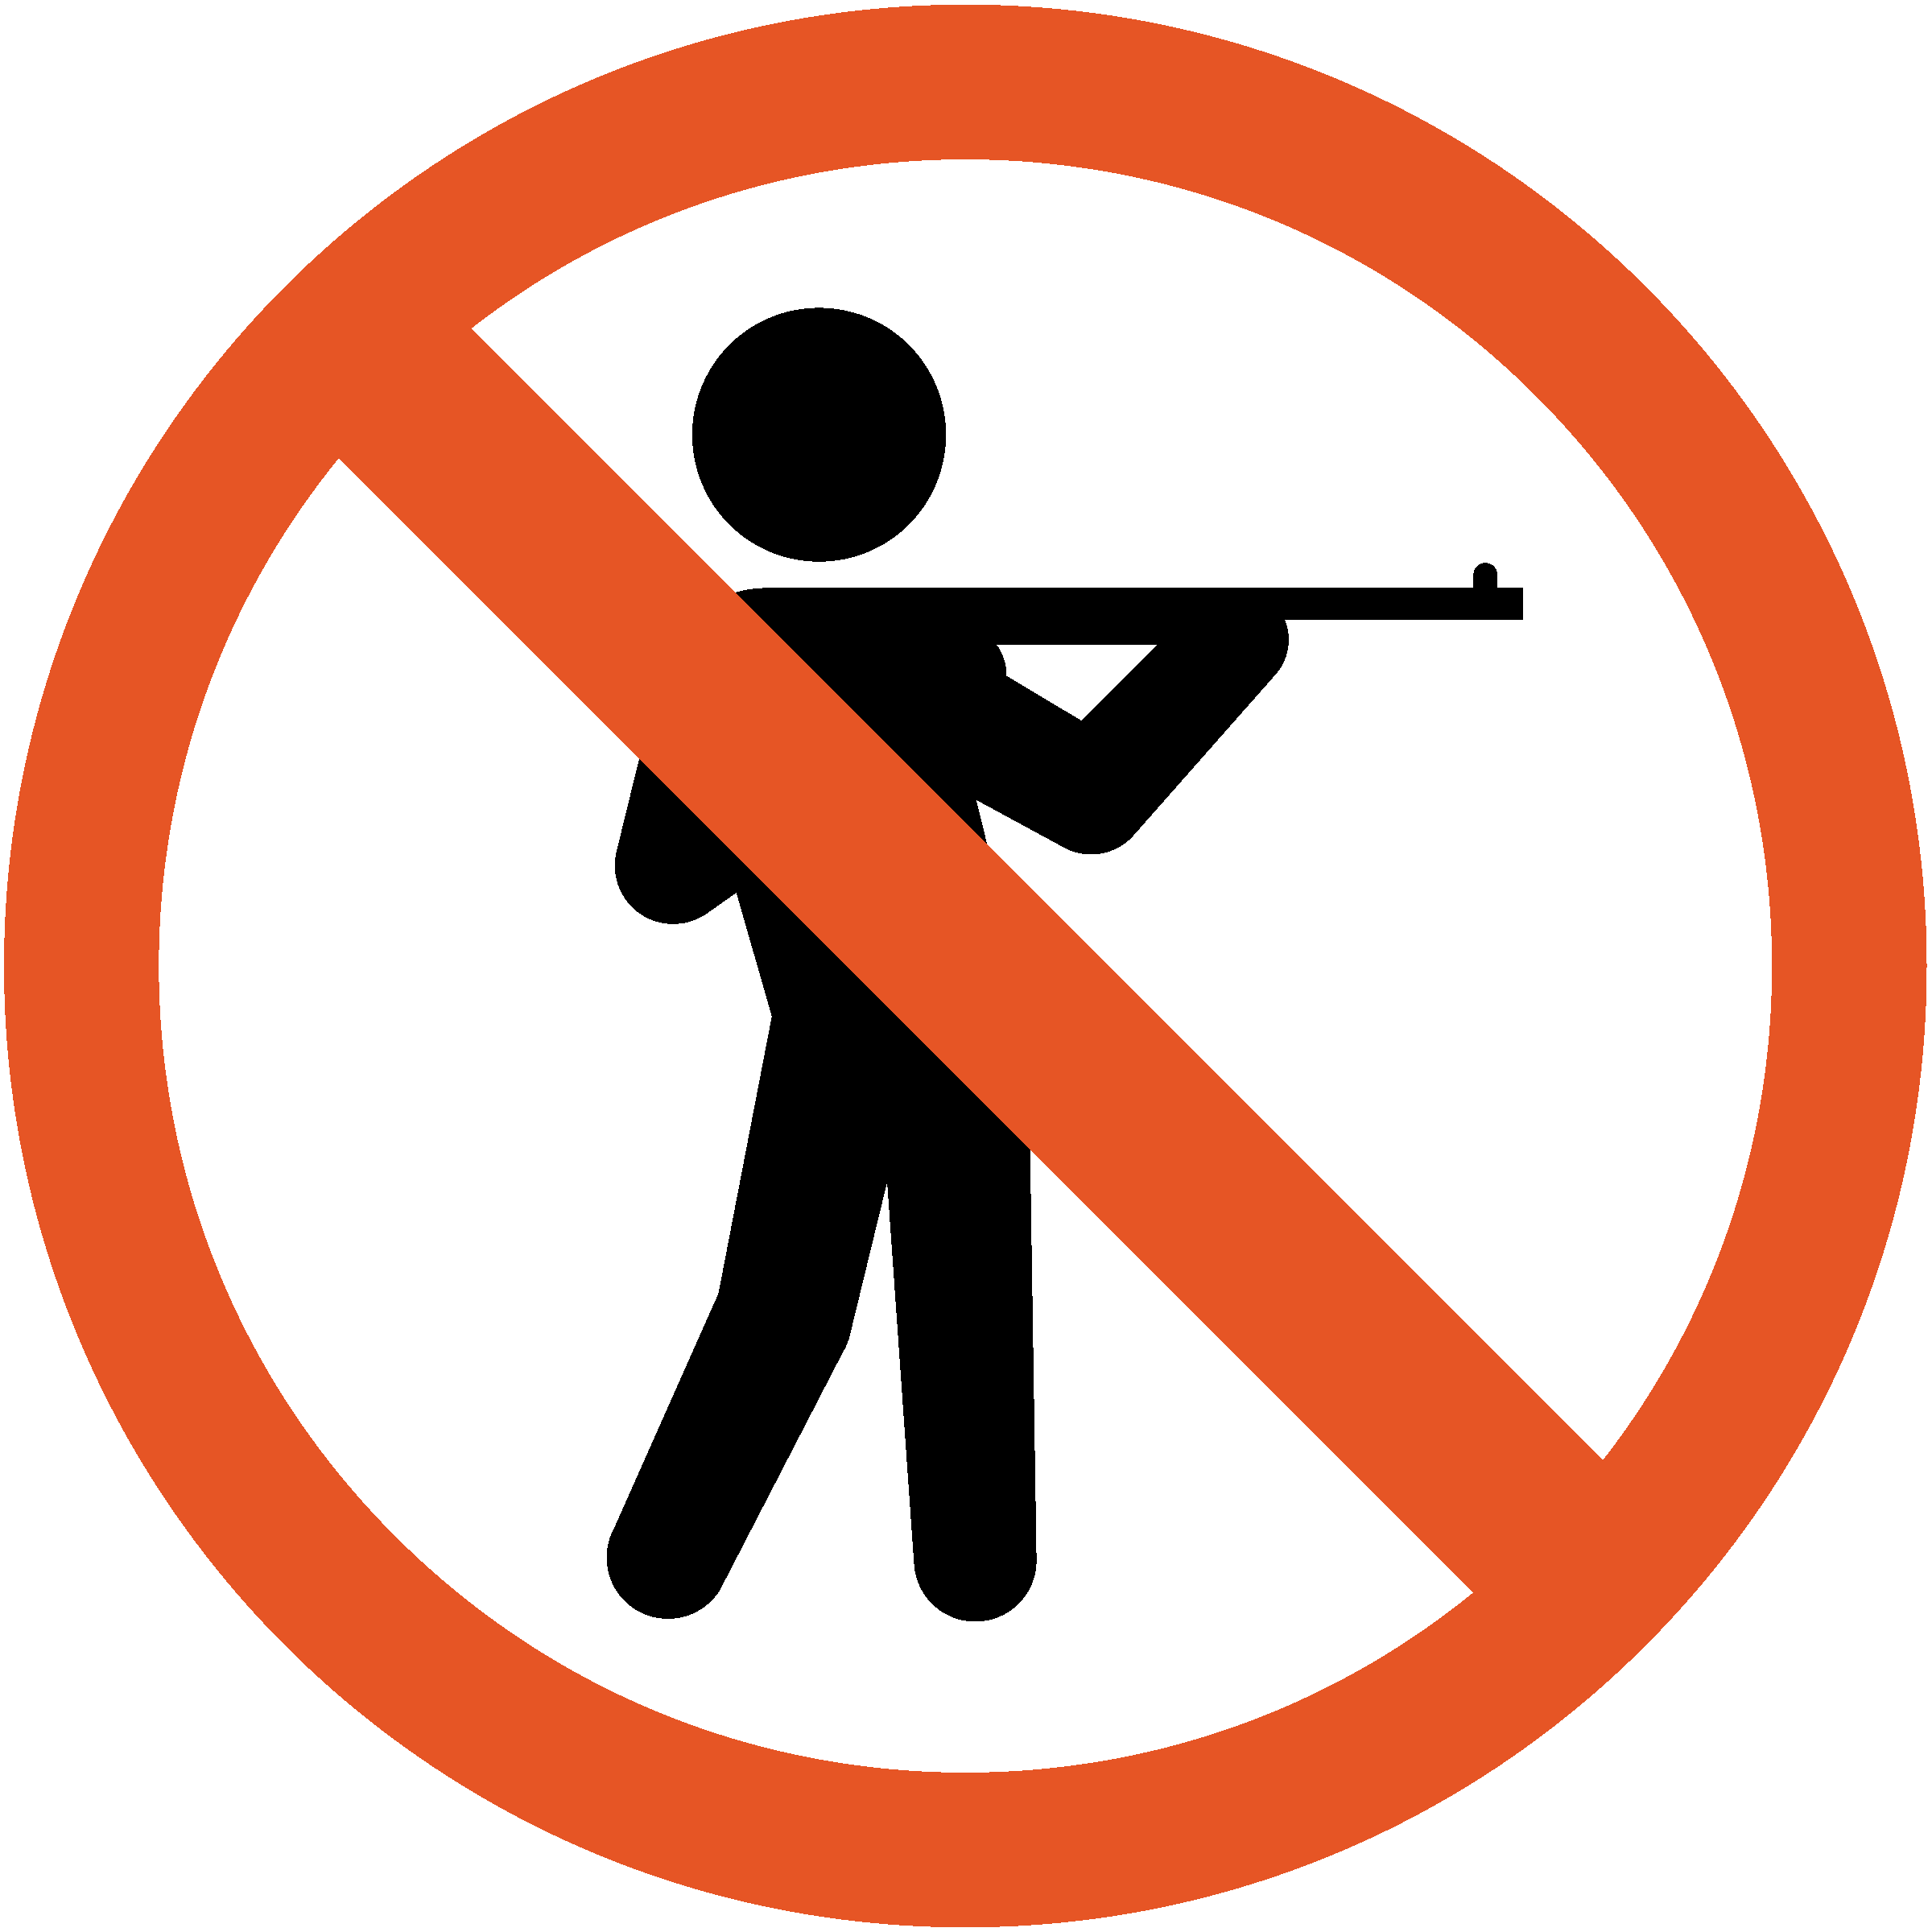 icon of no image with person holding hunting rifle